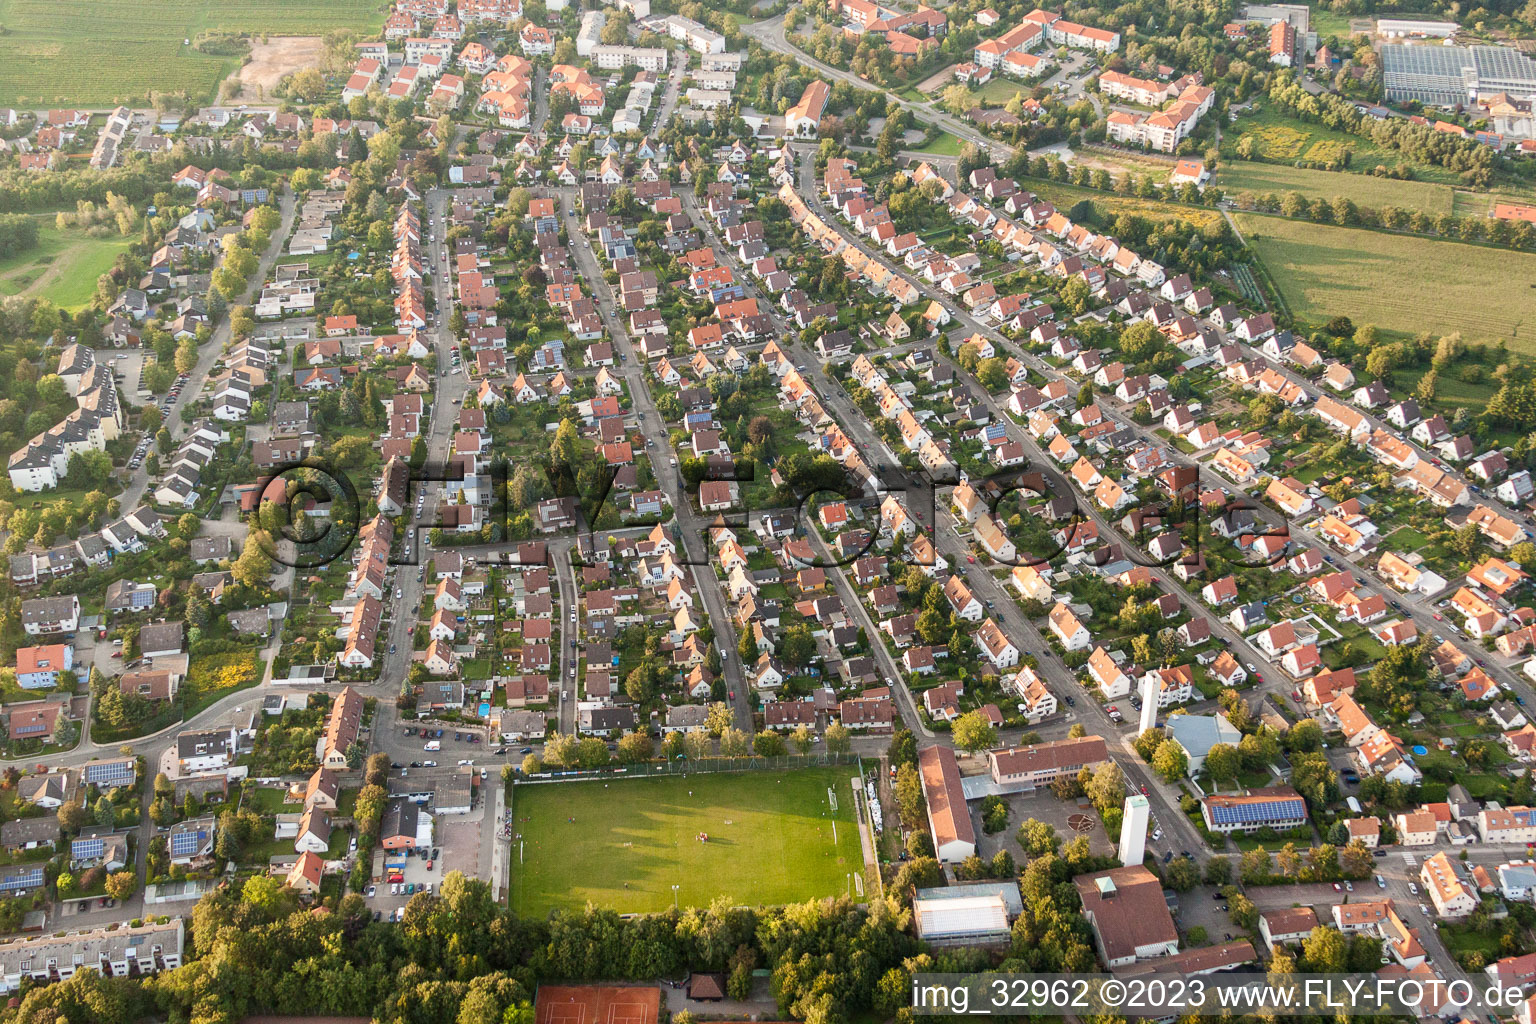 Aerial view of District West in the city in Landau in der Pfalz in the state Rhineland-Palatinate, Germany